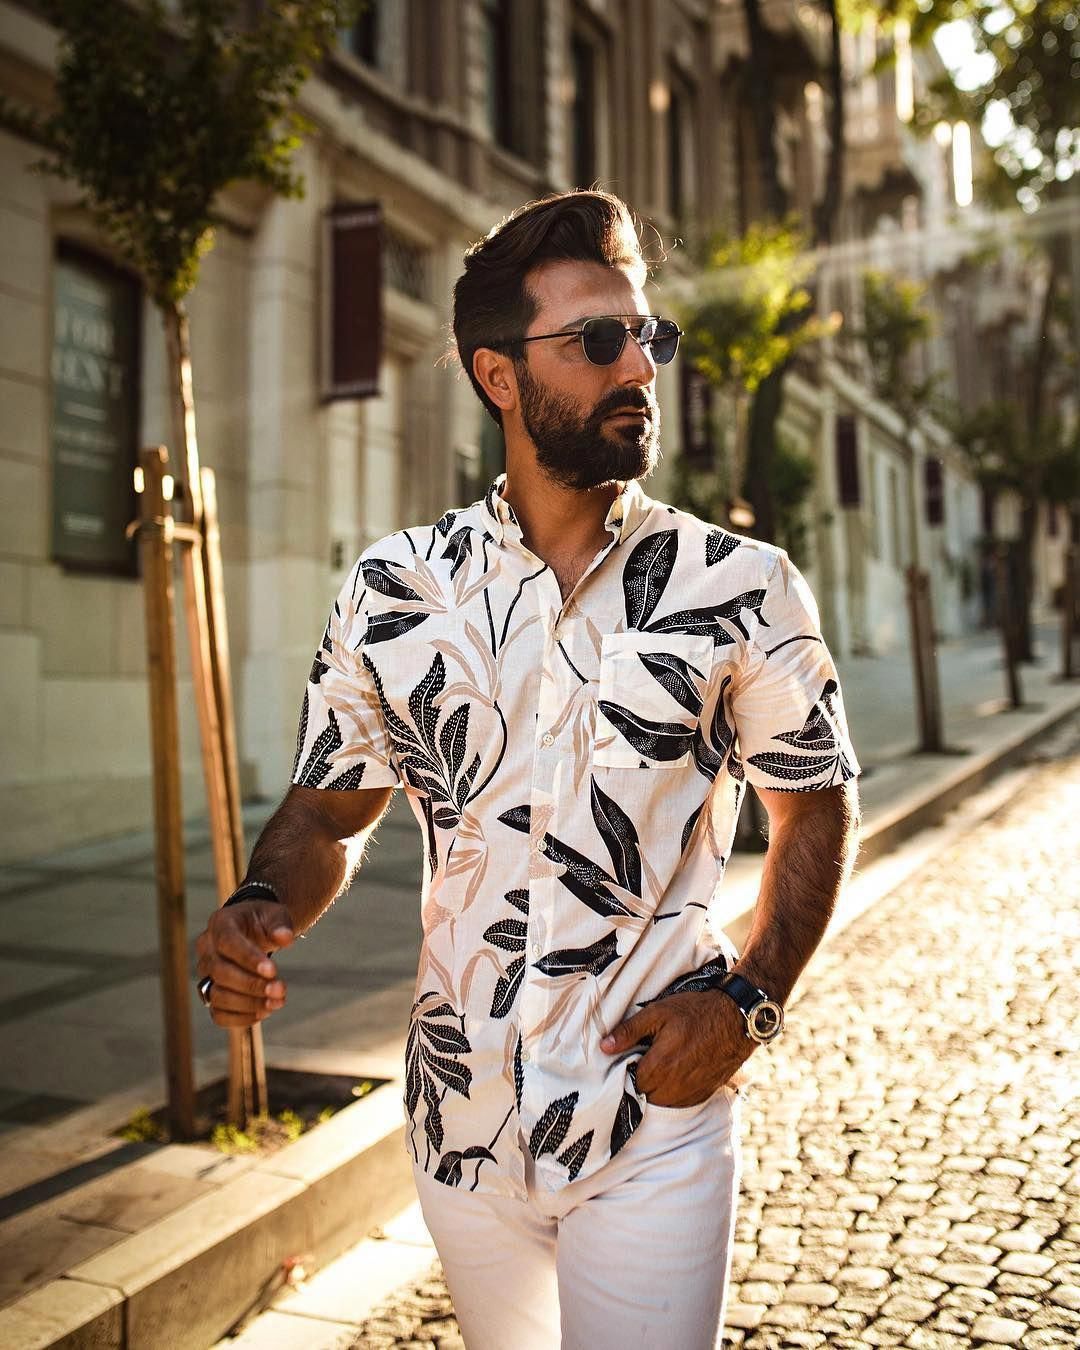 chemise hawaienne homme